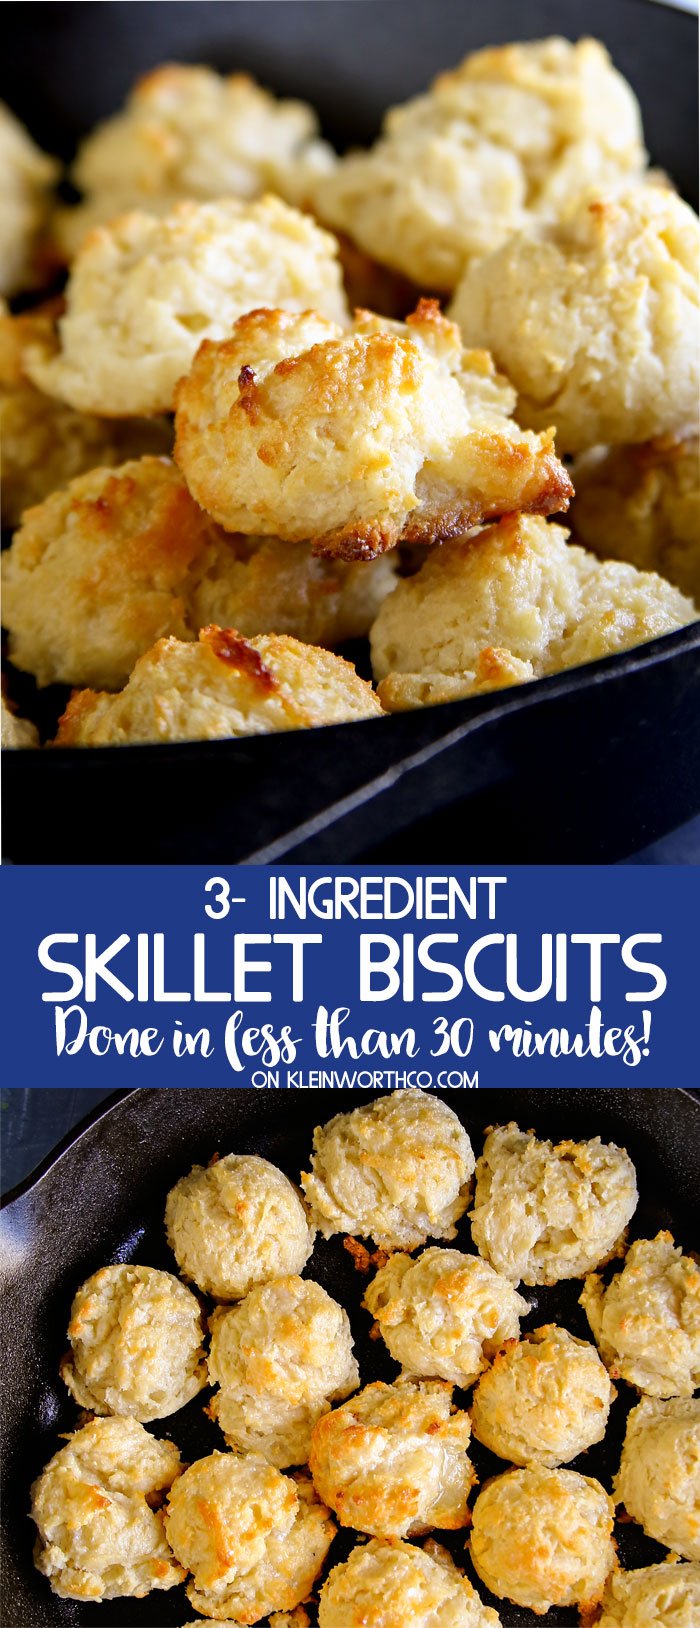 How to make Skillet Biscuits